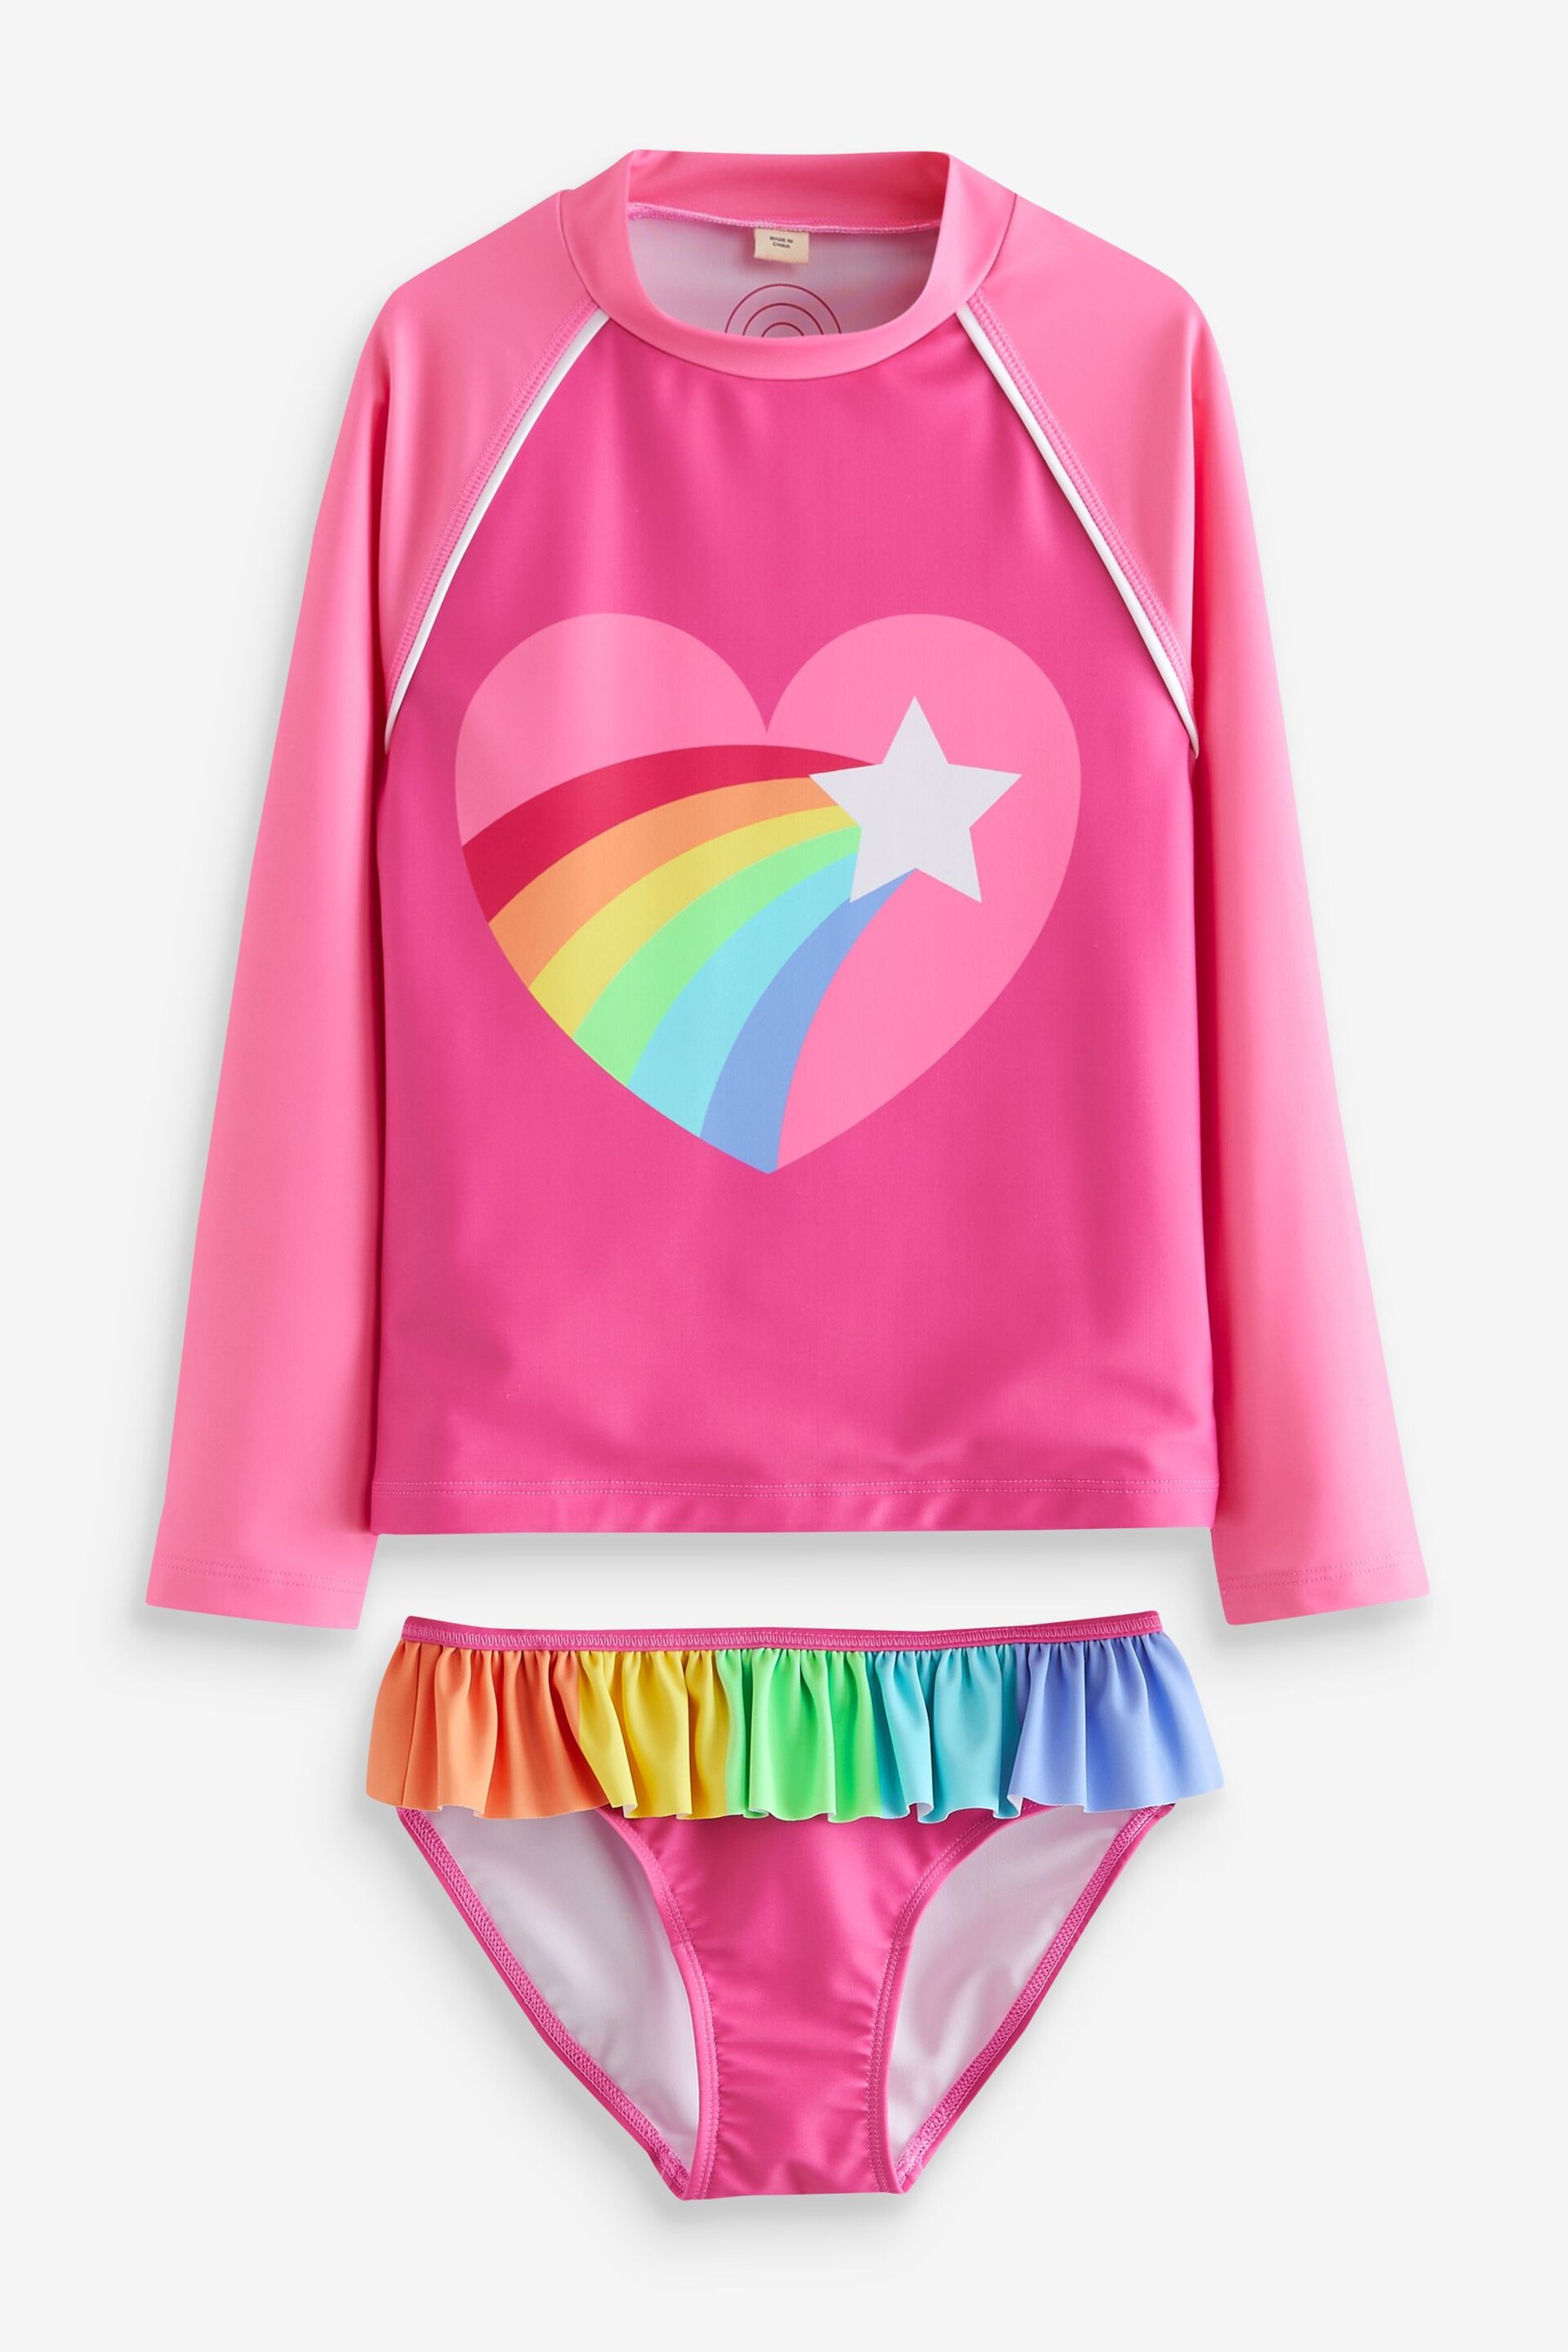 Little Bird by Jools Oliver Pink Long Sleeve Pink Heart Rash Top and Frill Bottoms Swim Set - Image 1 of 4